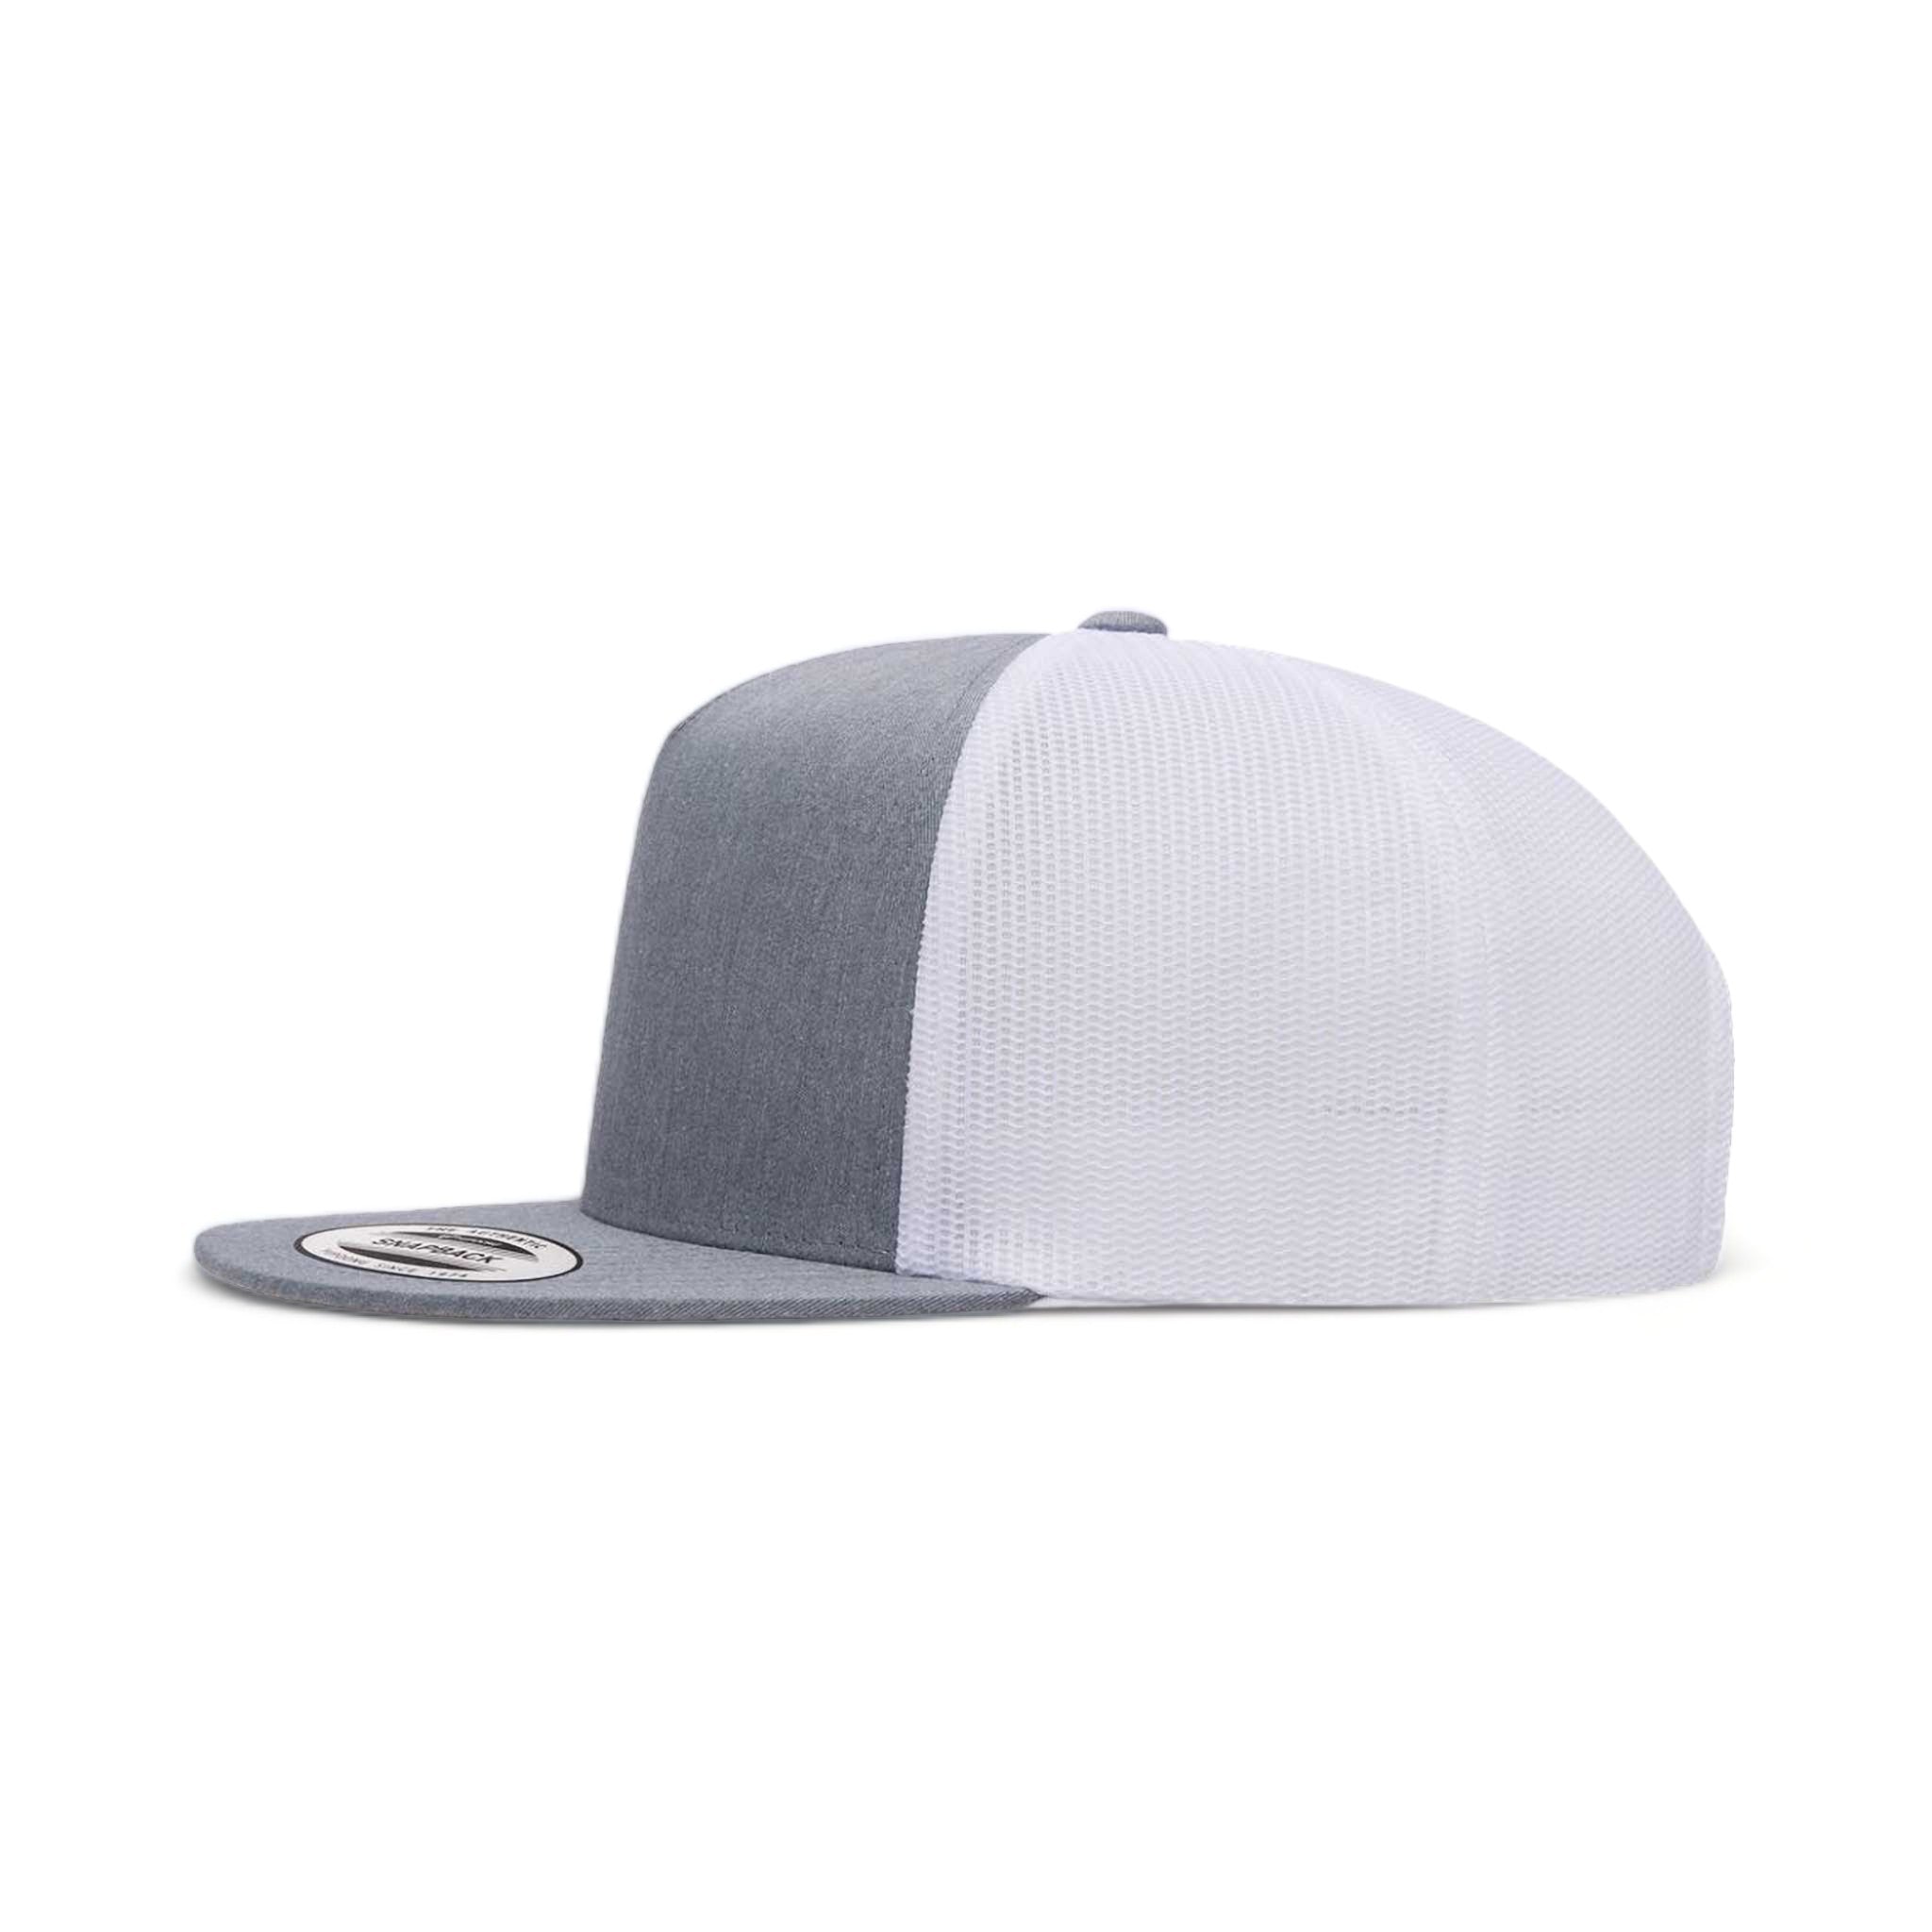 Side view of YP Classics 6006 custom hat in heather and white